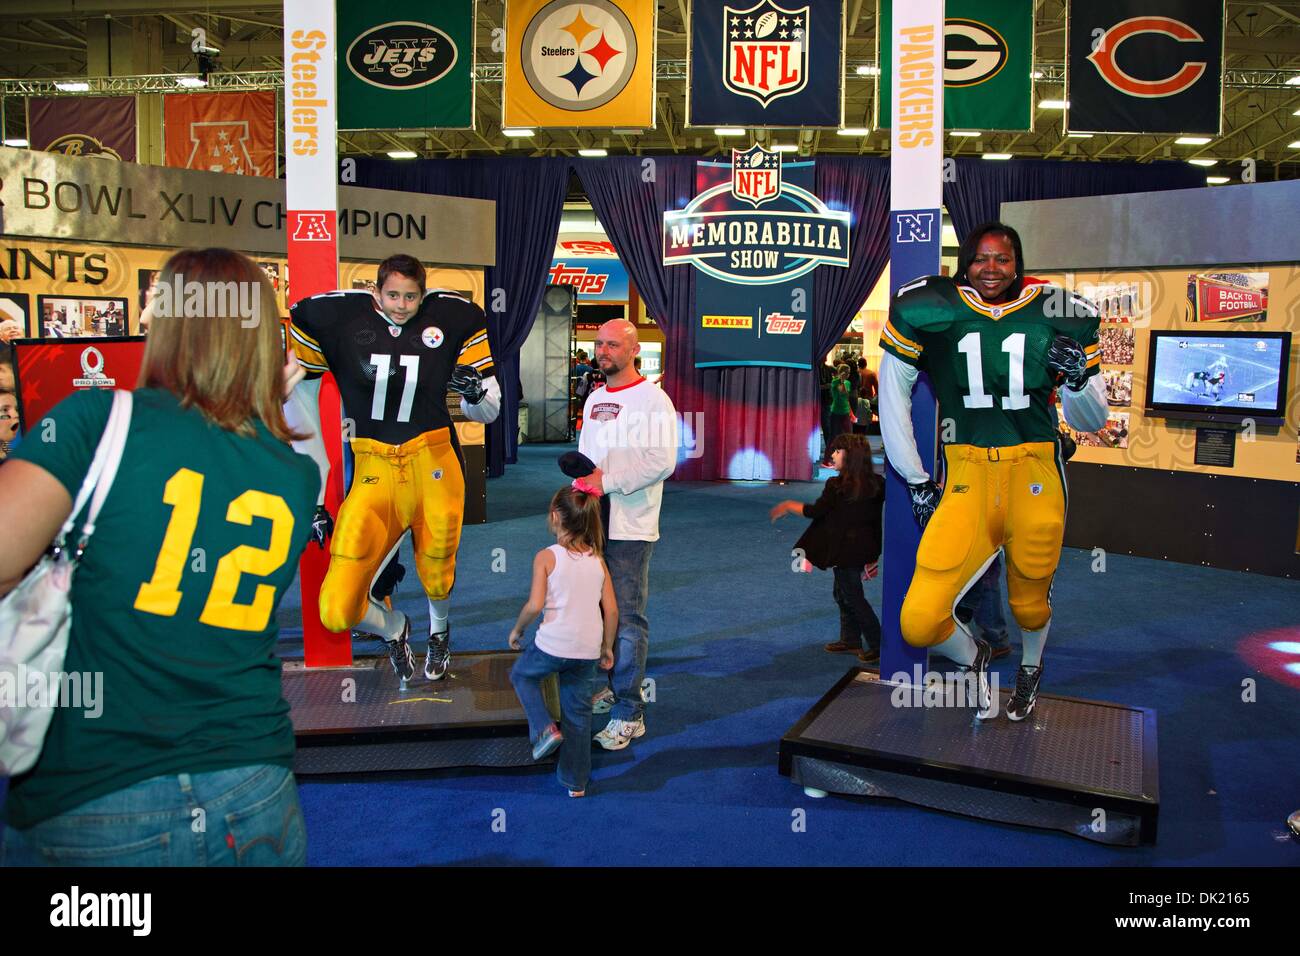 nfl experience at the convention center